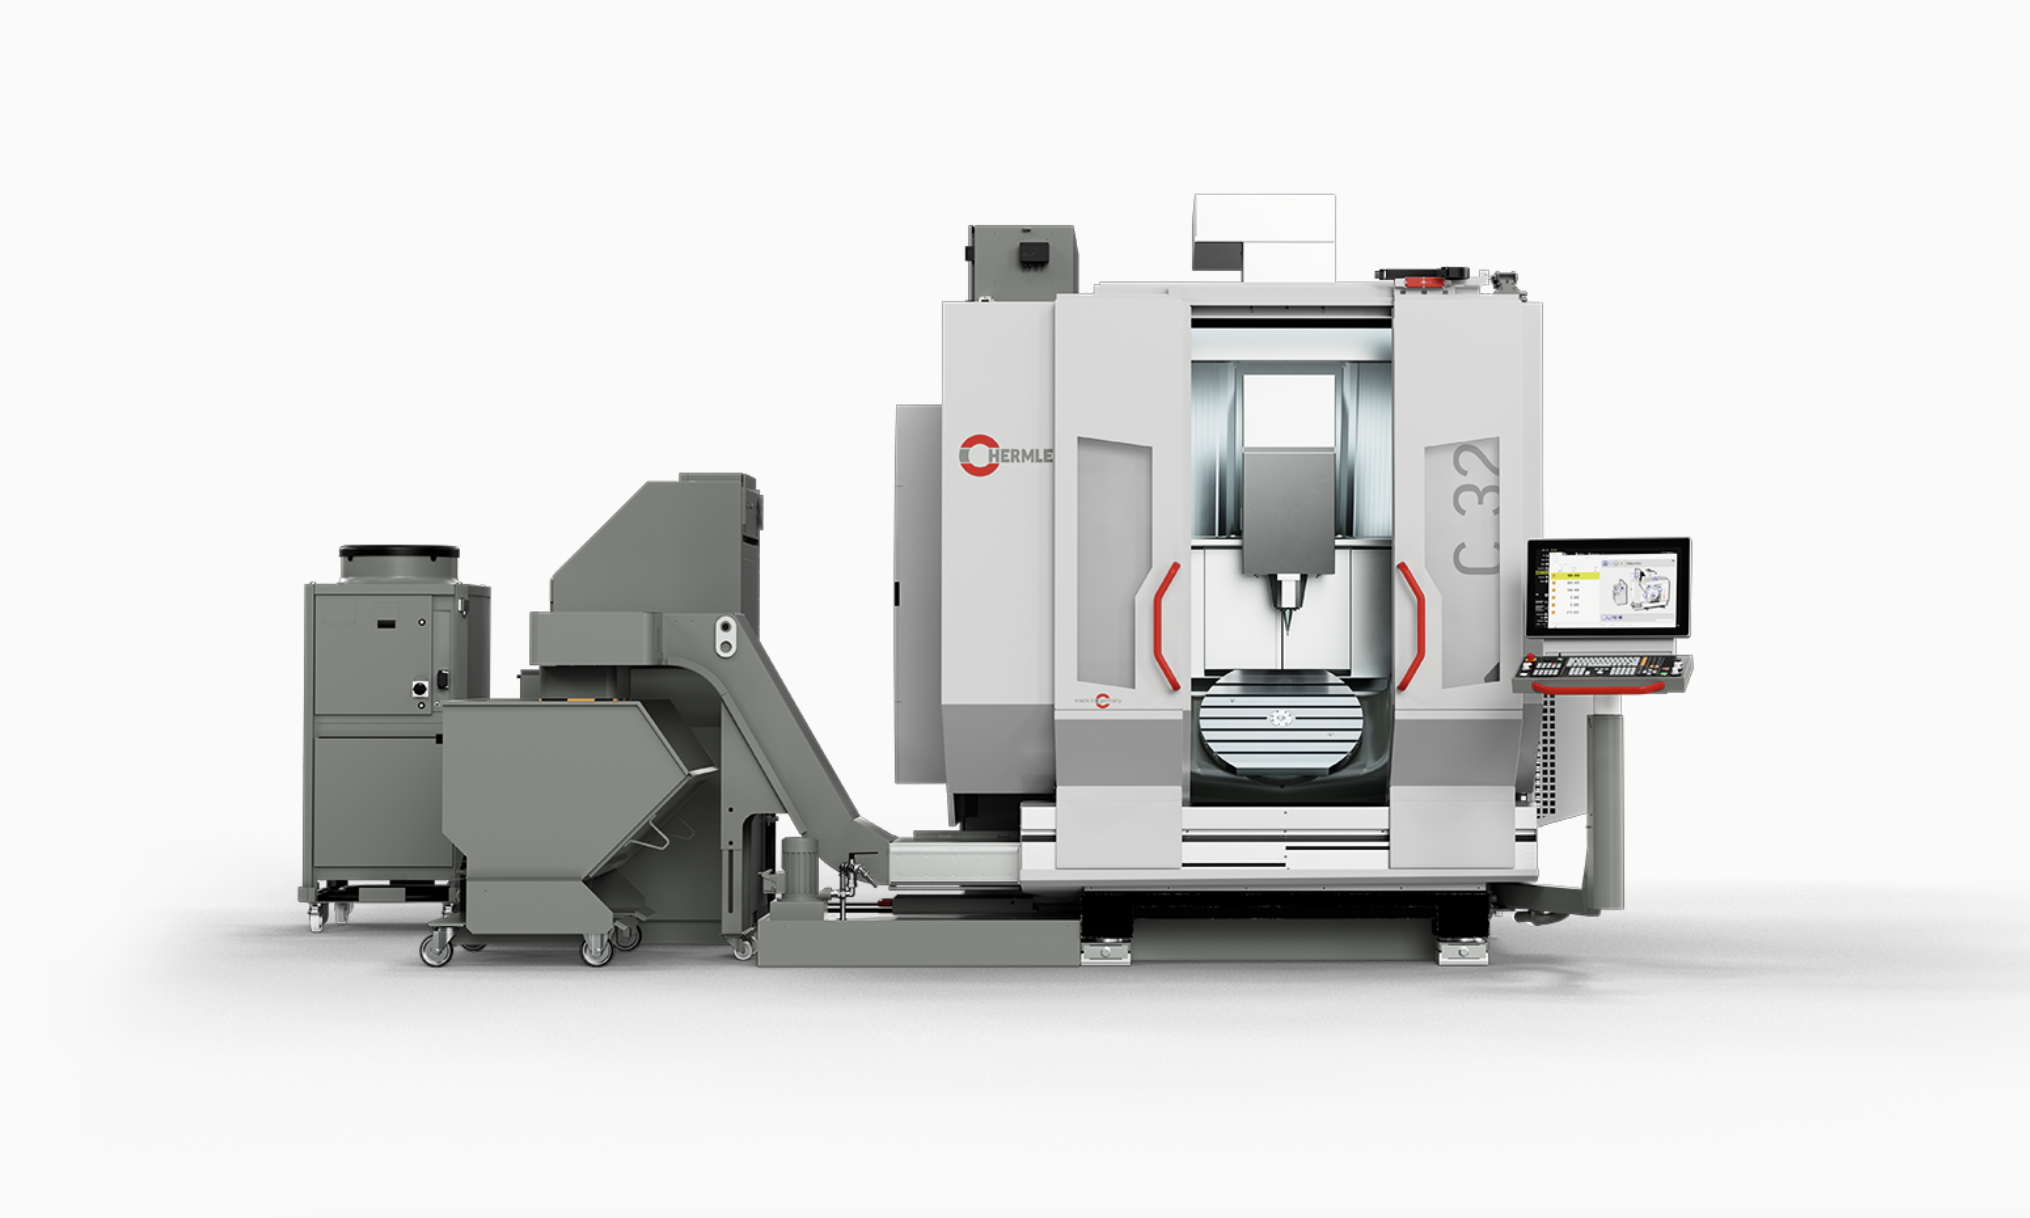 HERMLE Launches Much-Anticipated GEN2 Series Machines